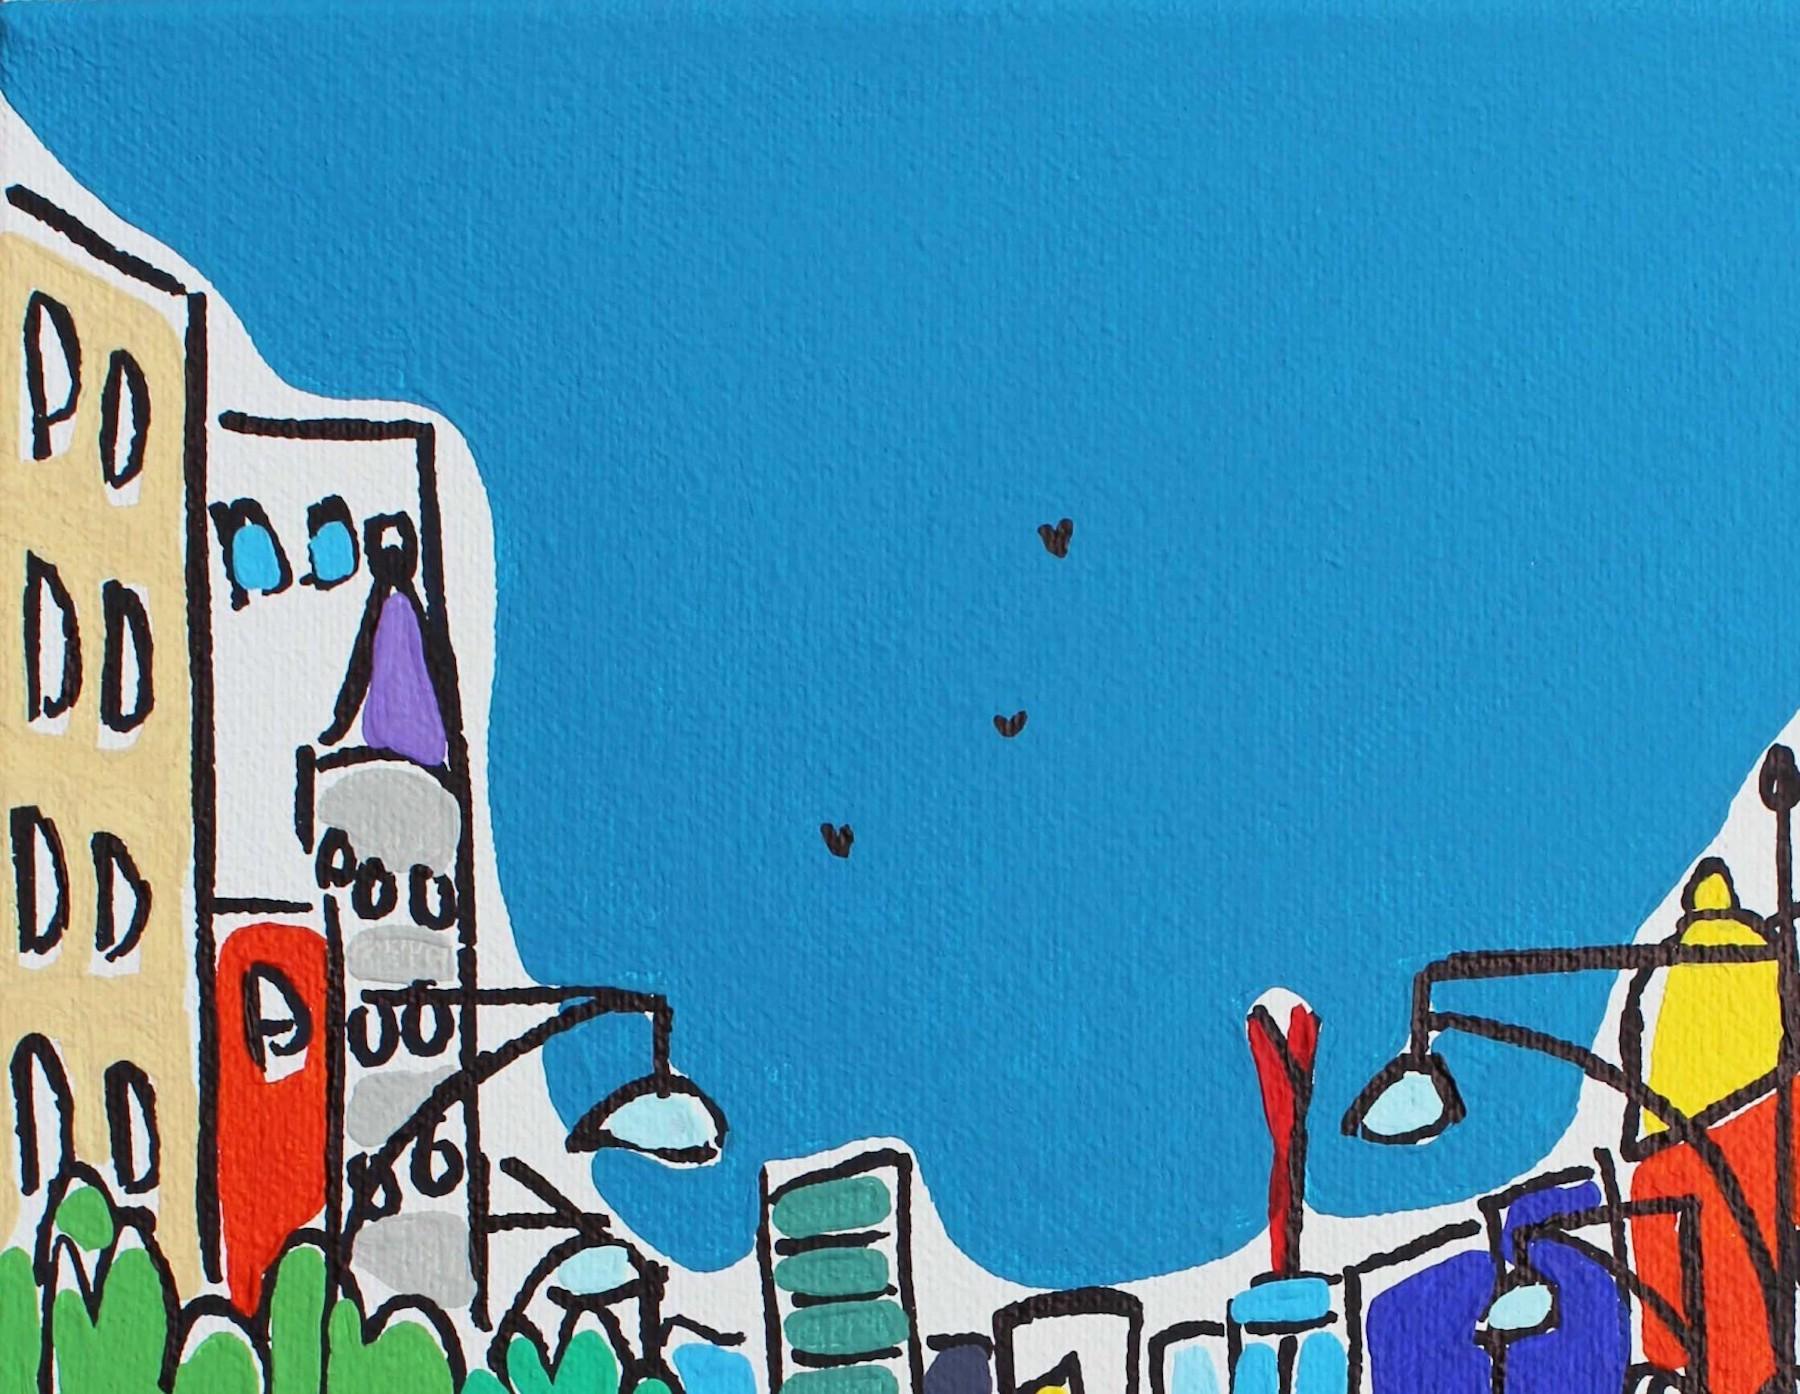 Mini Colours of Oxford Street, London Cityscape Painting, Bright Pop Art - Blue Still-Life Painting by Unknown